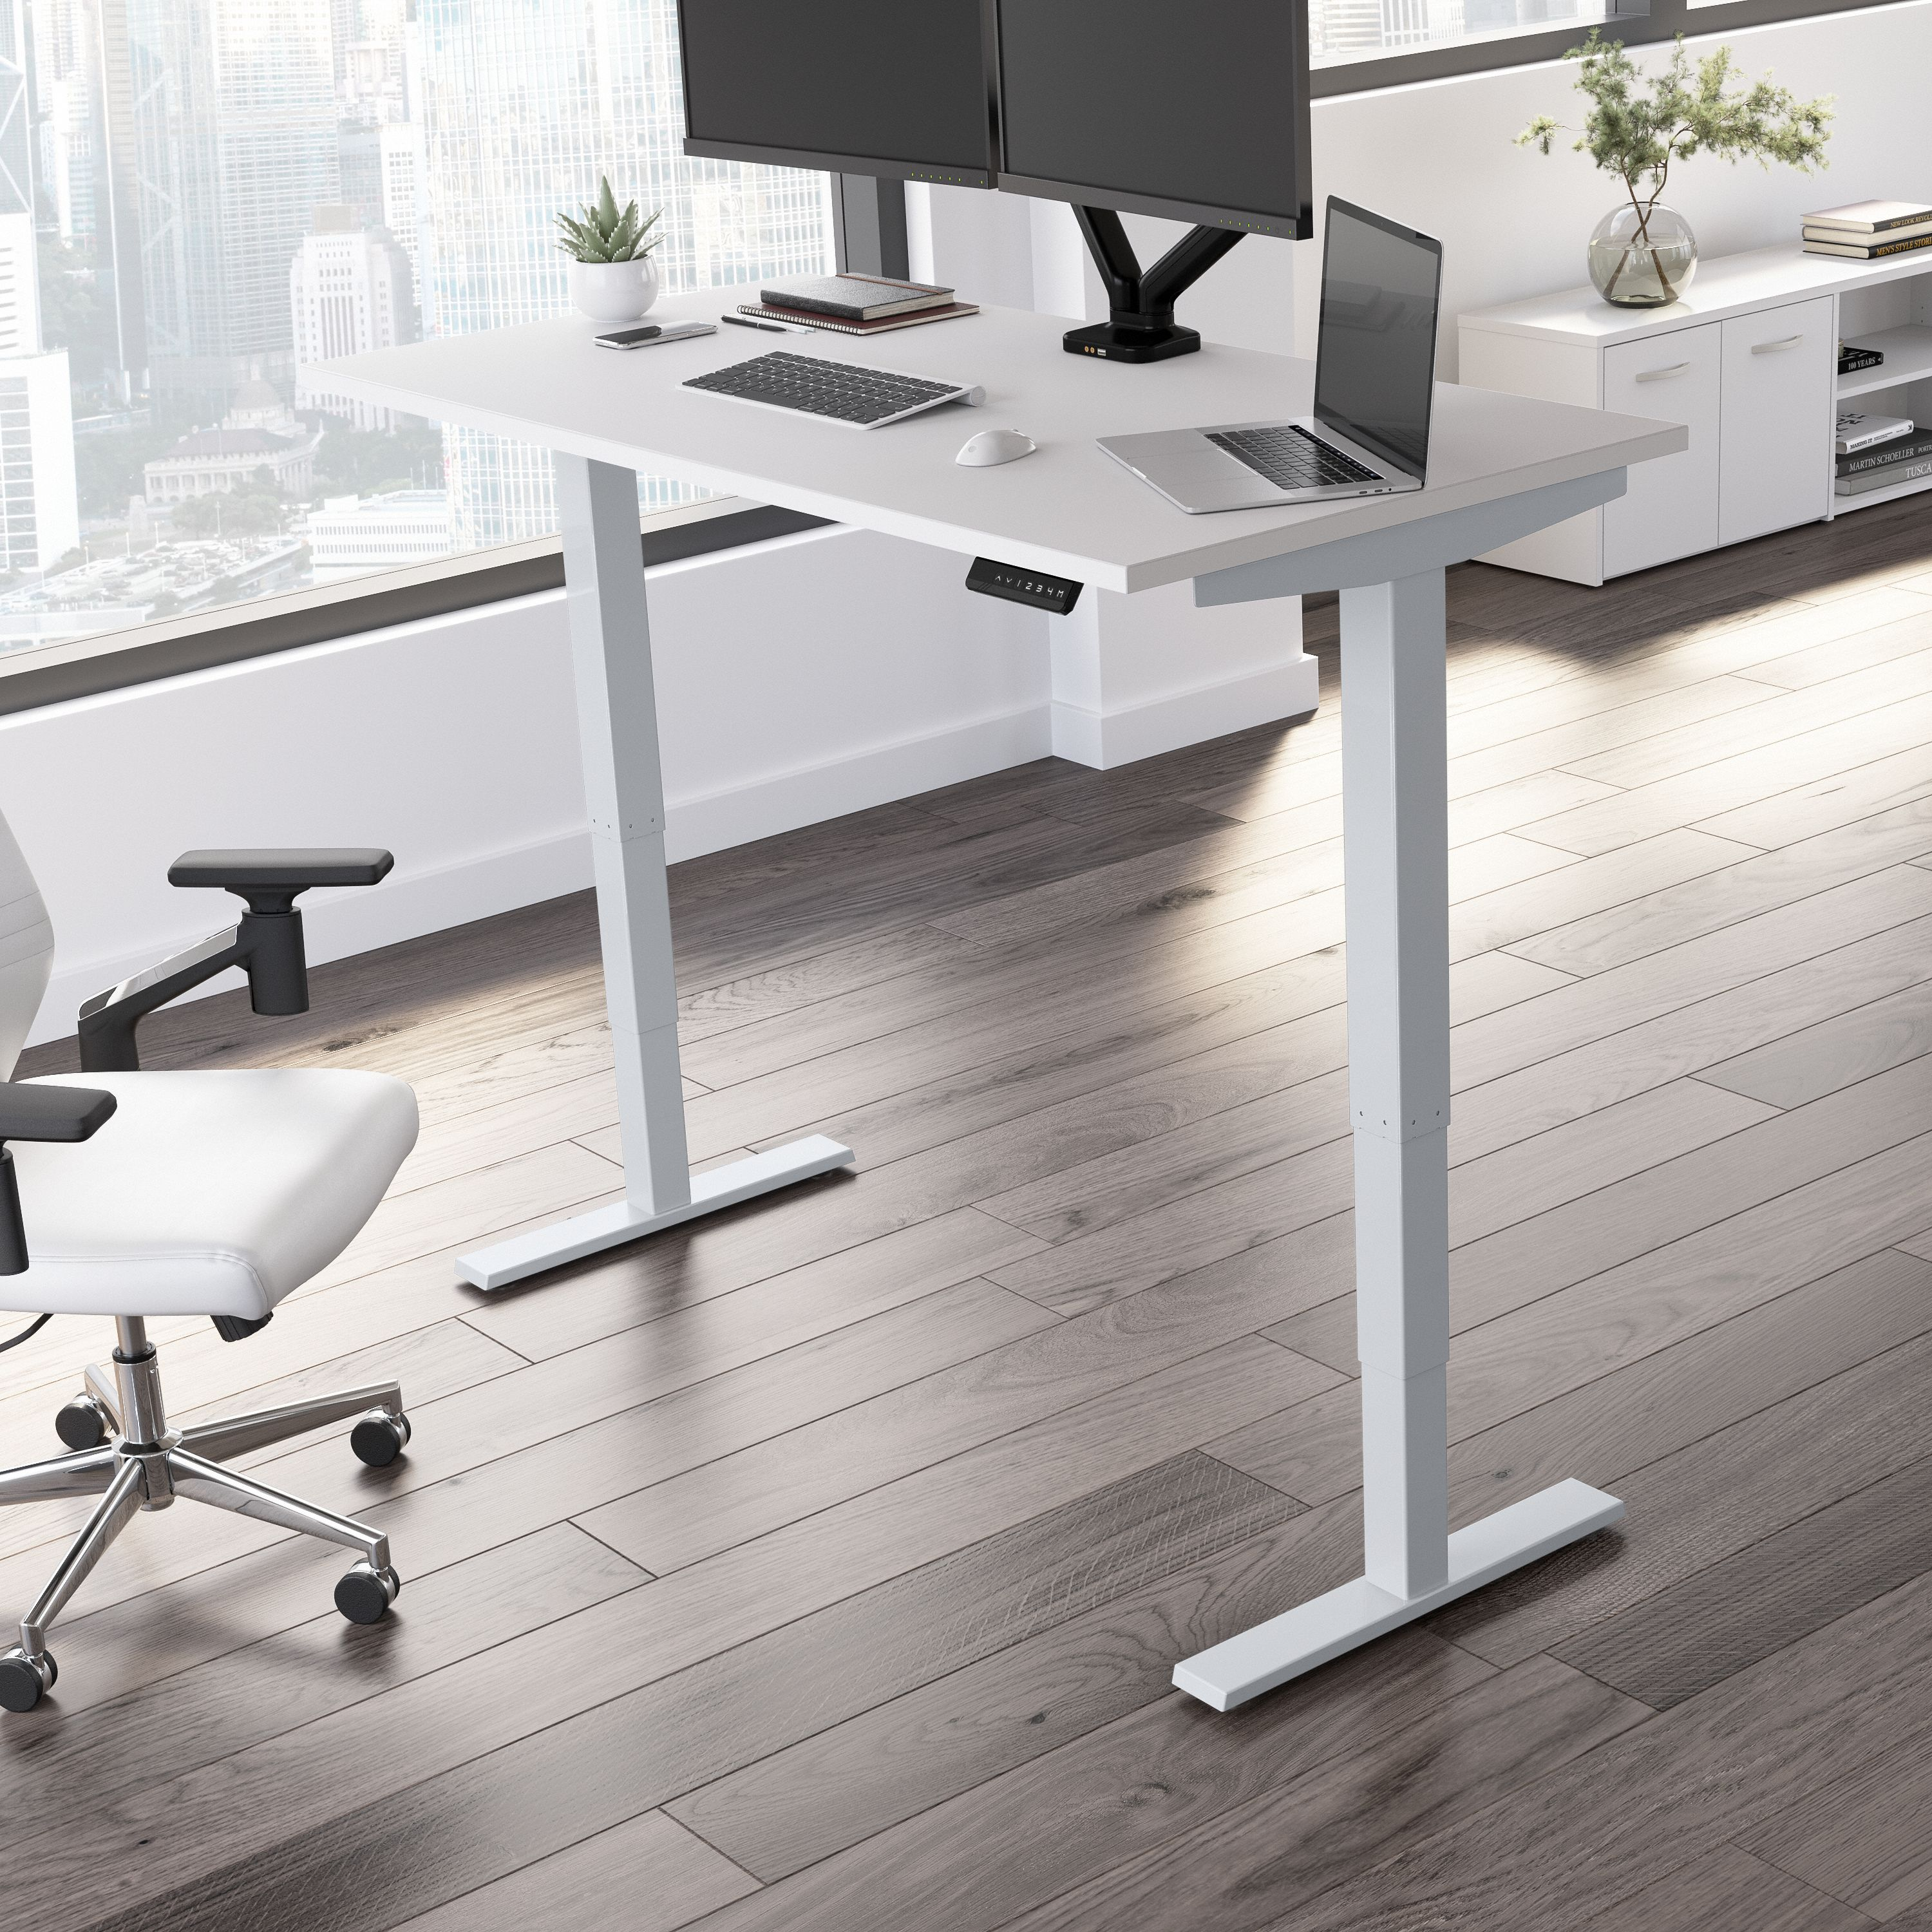 Shop Move 40 Series by Bush Business Furniture 60W x 30D Electric Height Adjustable Standing Desk 01 M4S6030WHSK #color_white/cool gray metallic